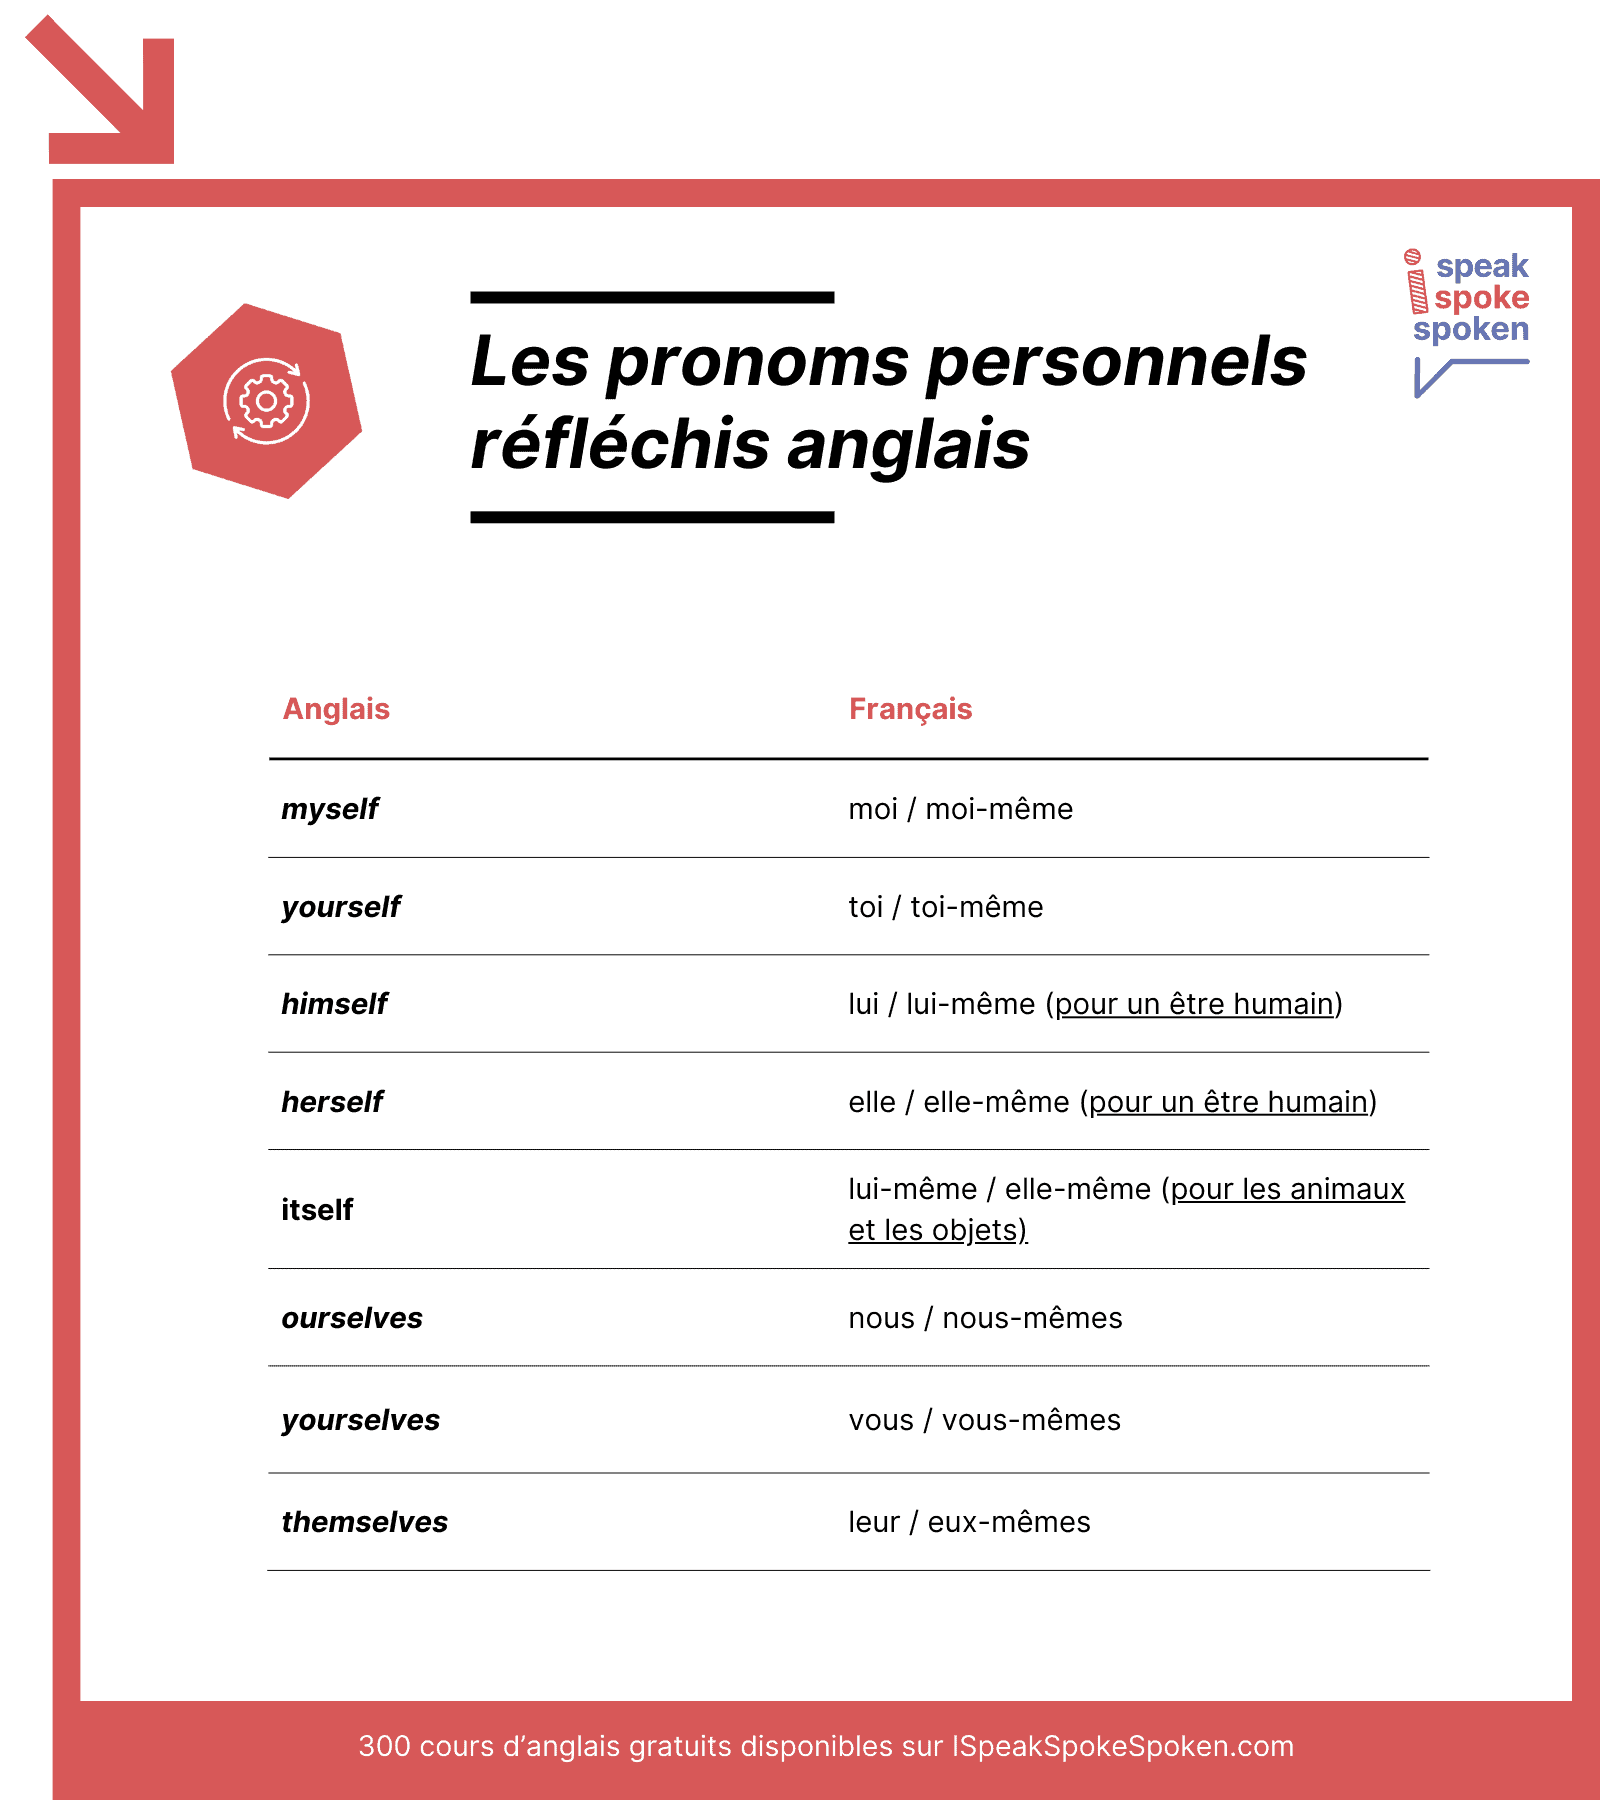 liste des pronoms personnels réfléchis anglais : myself, yourself, himself, herself, itself, ourselves, yourselves, themselves